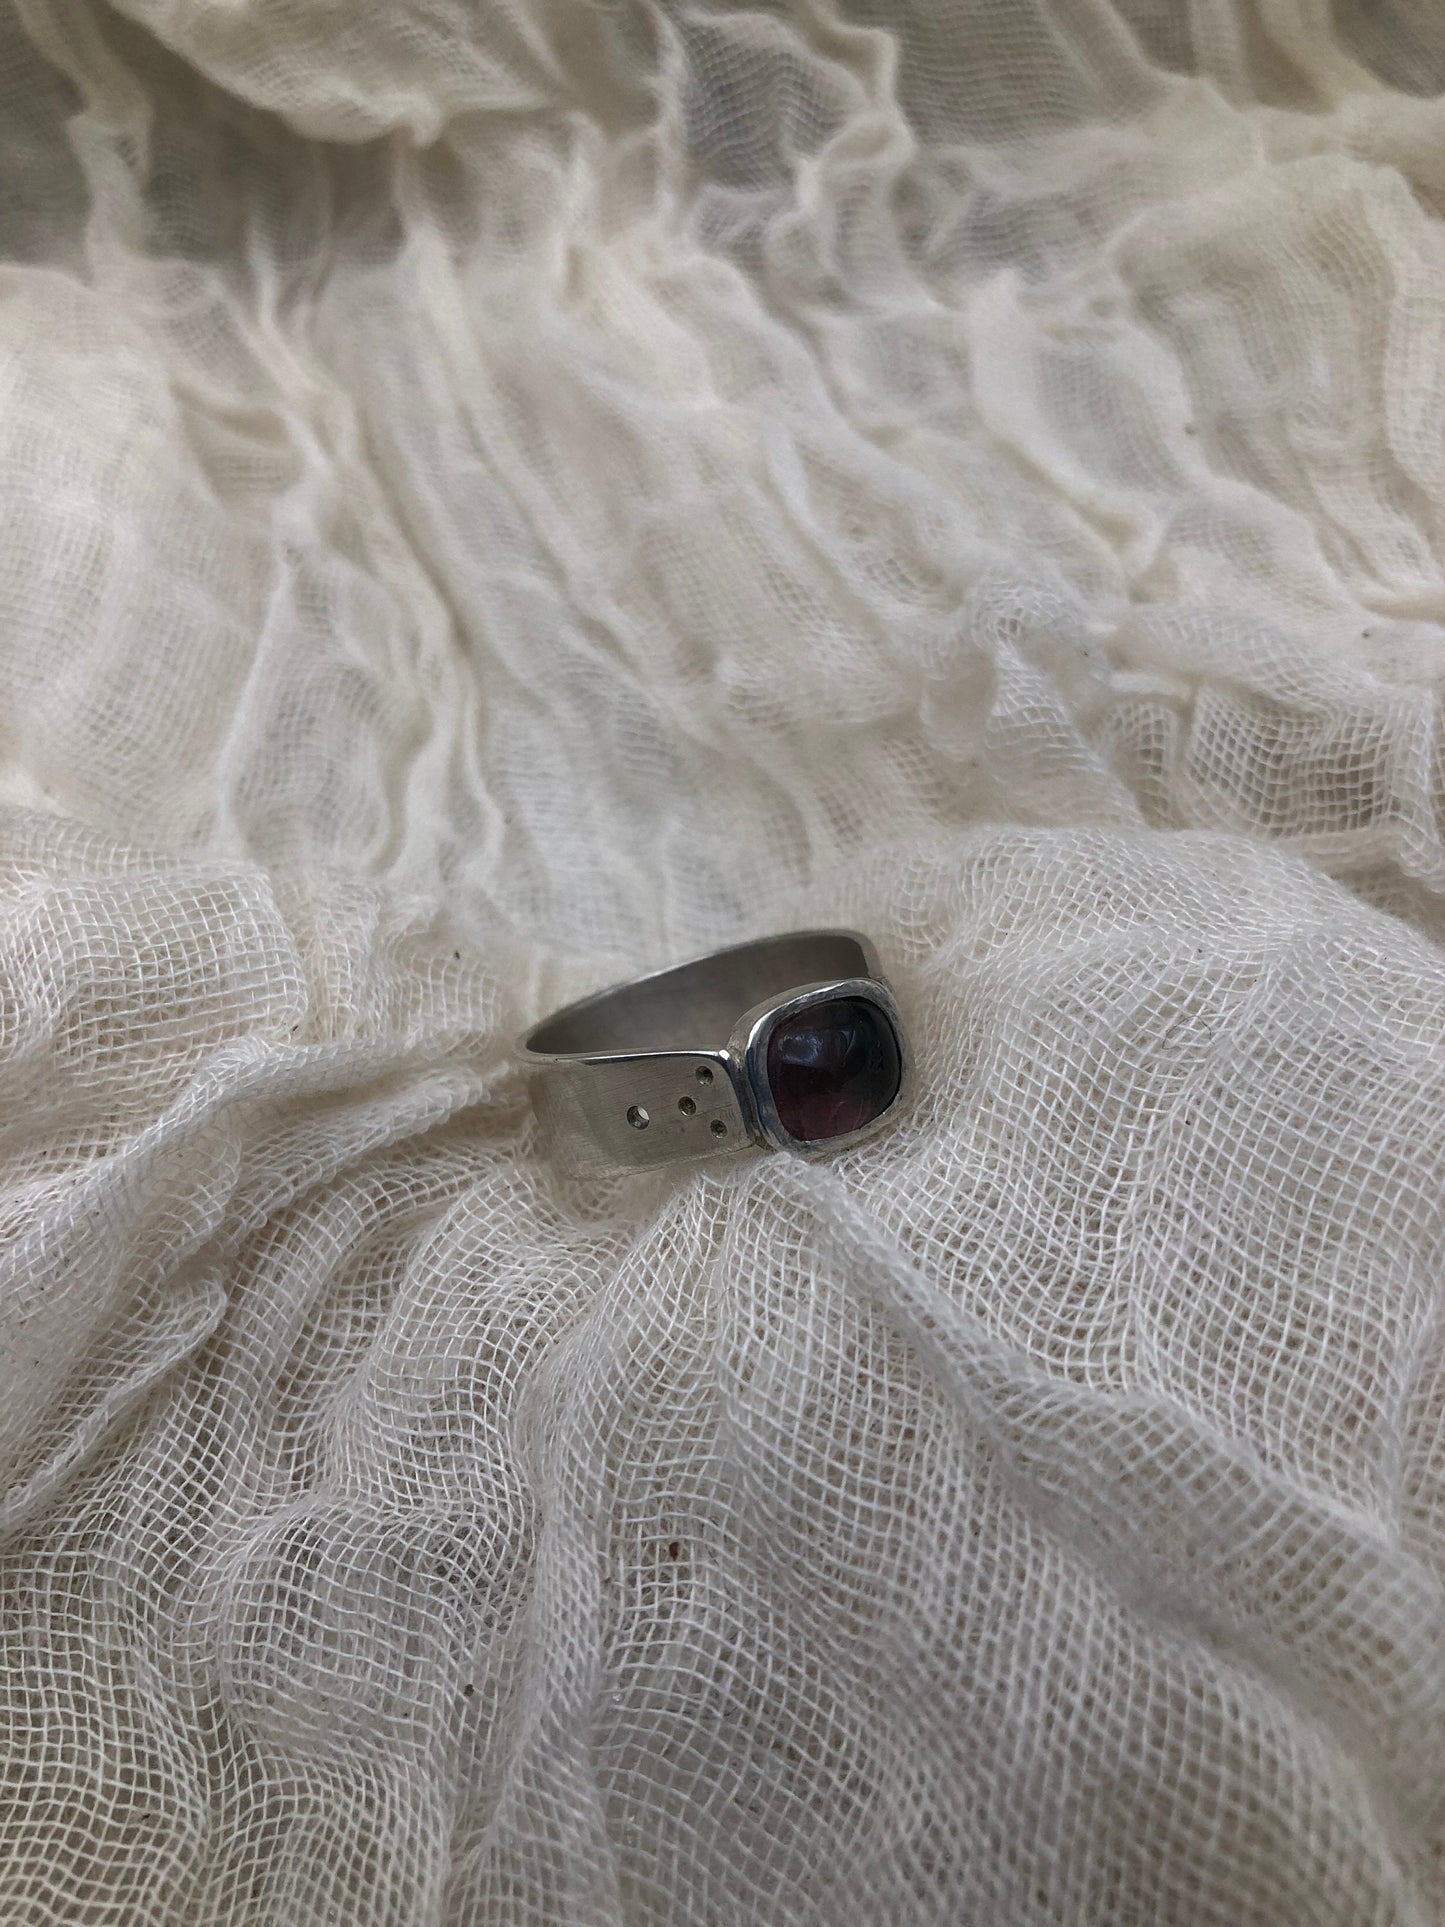 Watermelon tourmaline ring in argentium sterling silver with a wide pierced band